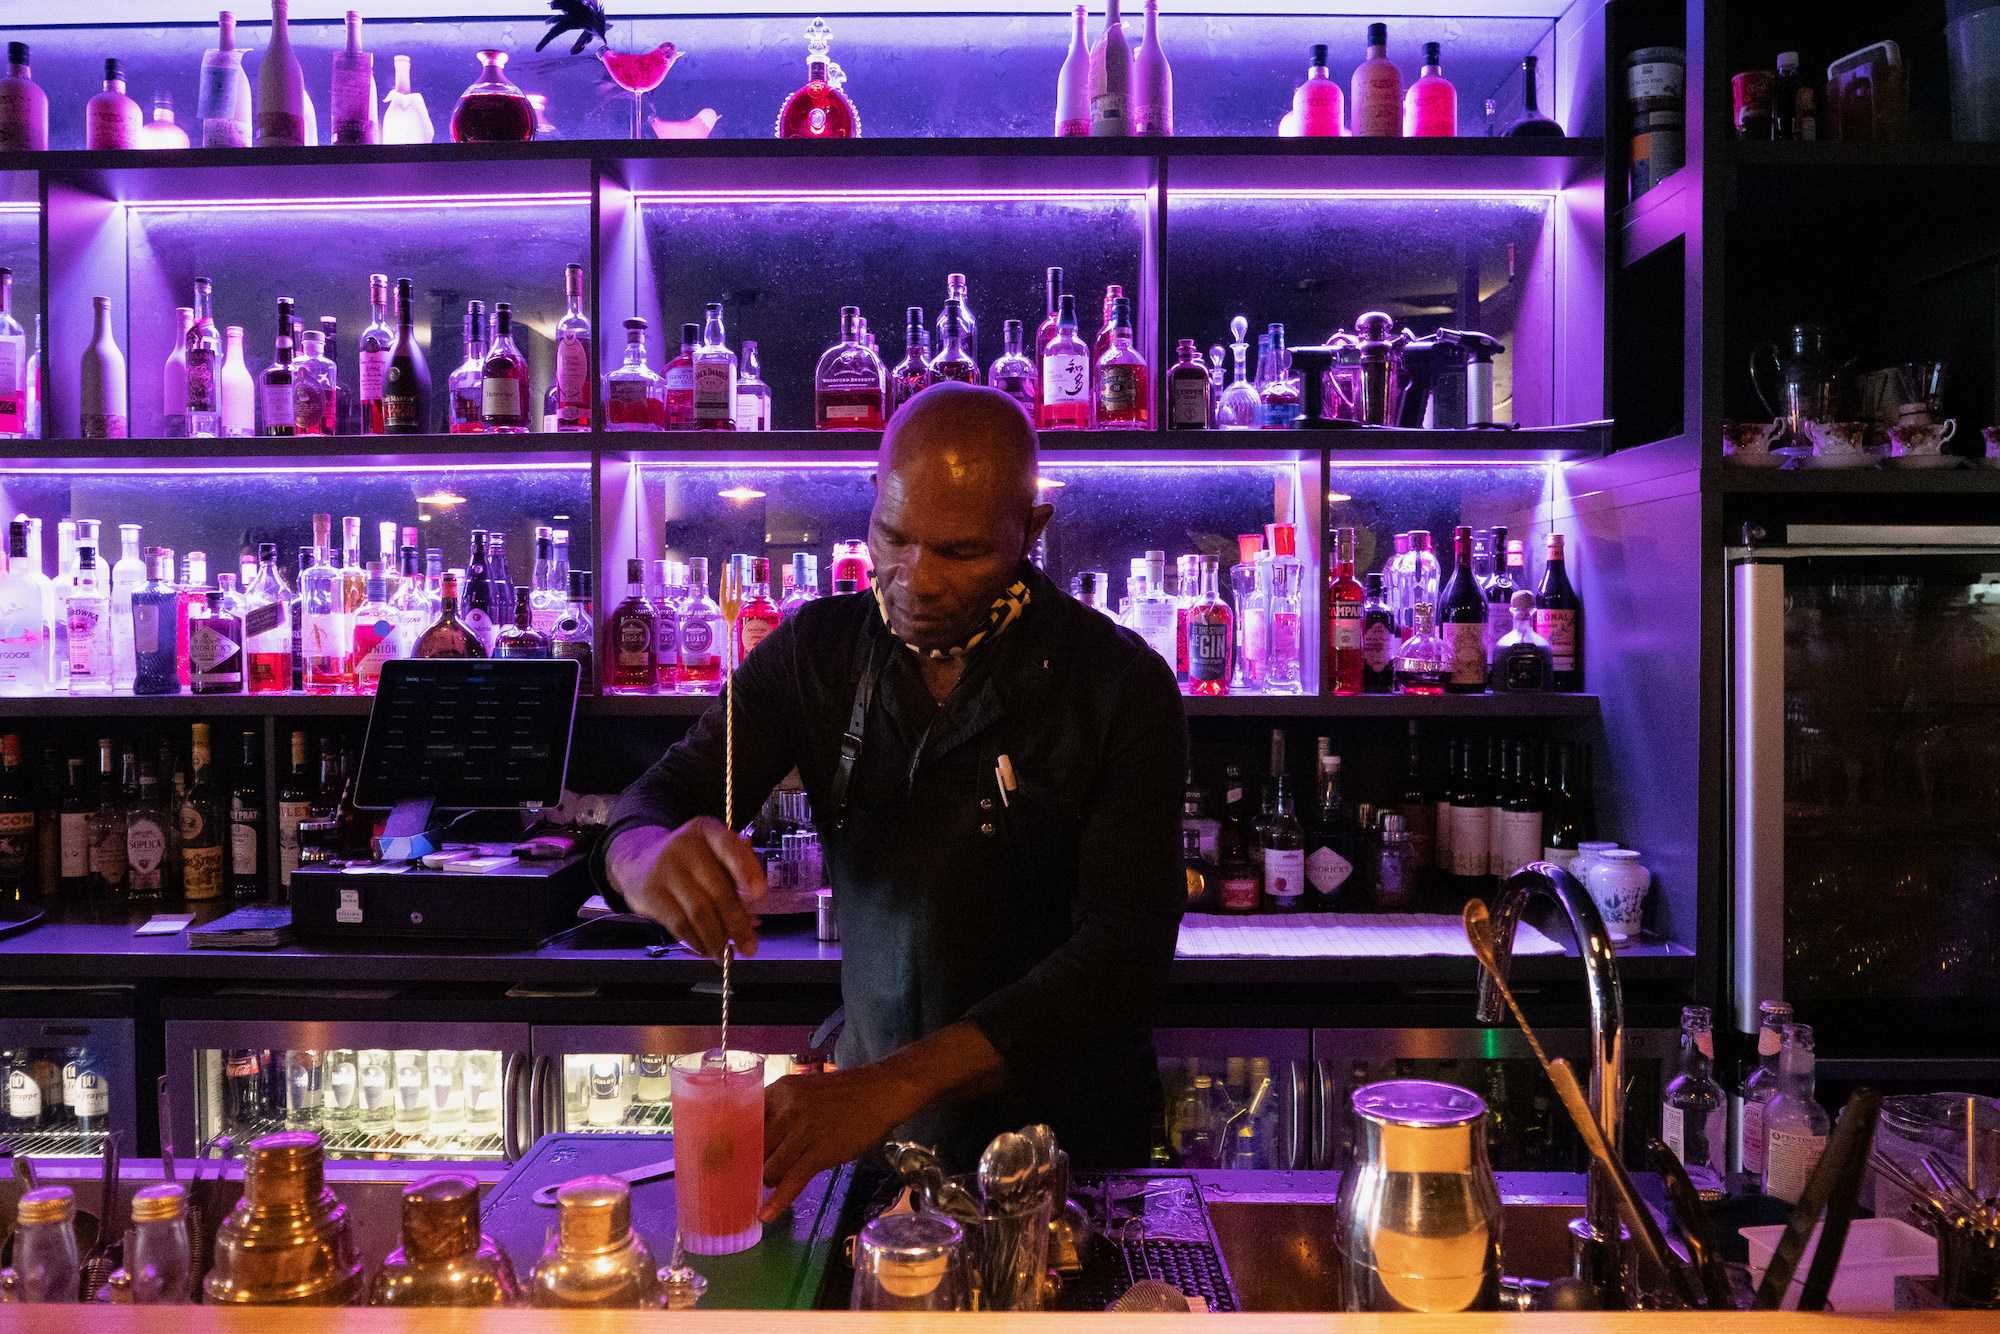 Owner of Amsterdam hot spot, Labyrinth, sees his business as more than just a place for great cocktails, bites, and community events.